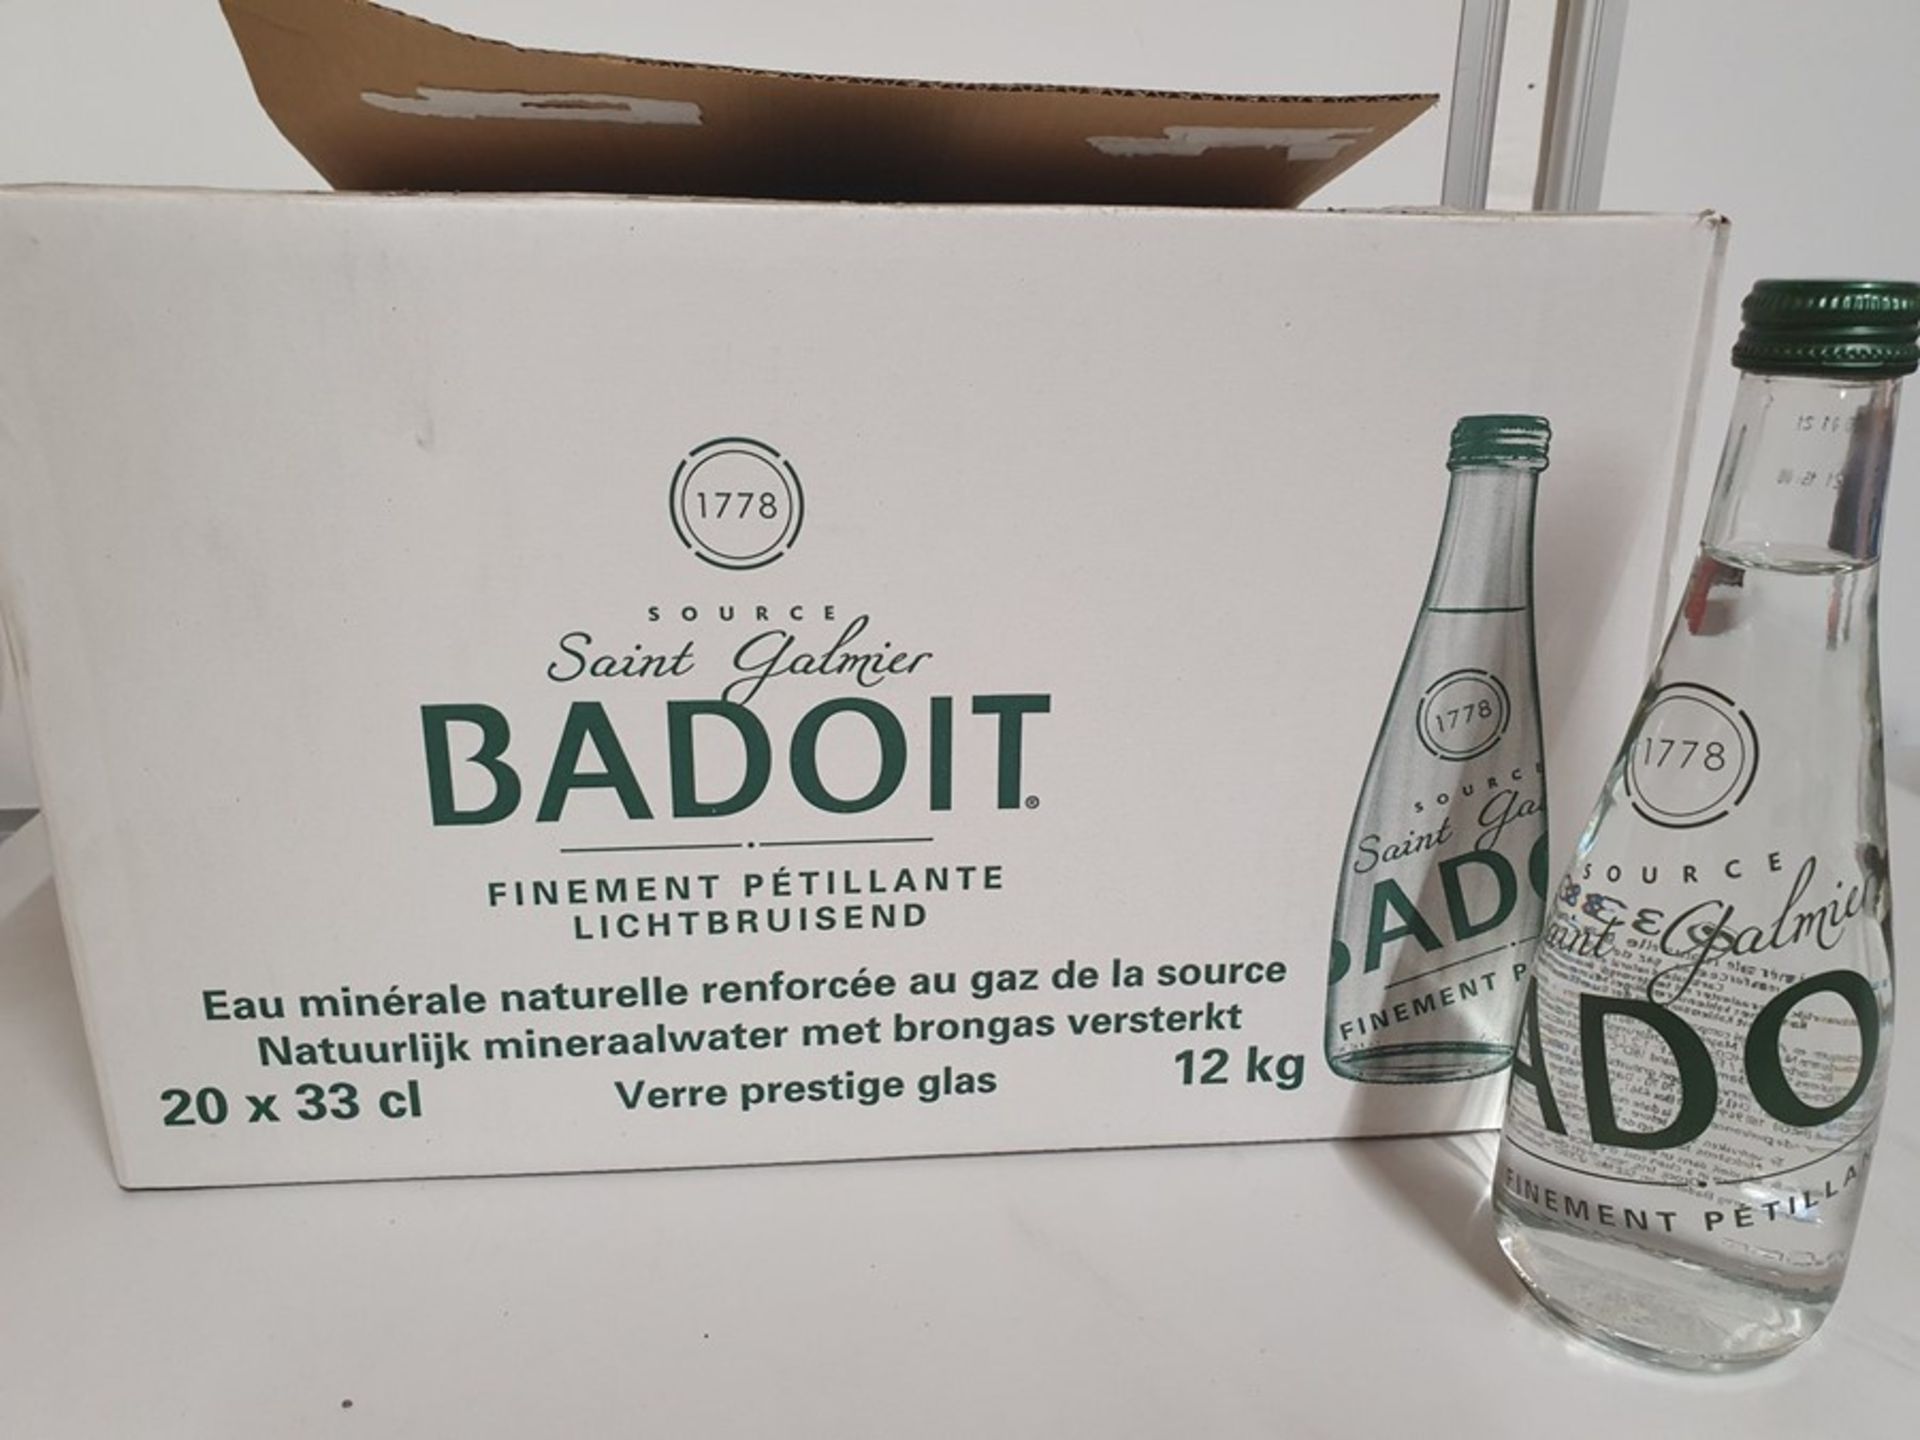 ONE LOT TO CONTAIN ONE BOX OF BADOIT NATURAL SPARKLING MINERAL WATER GLASS BOTTLED. 20 BOTTLES PER